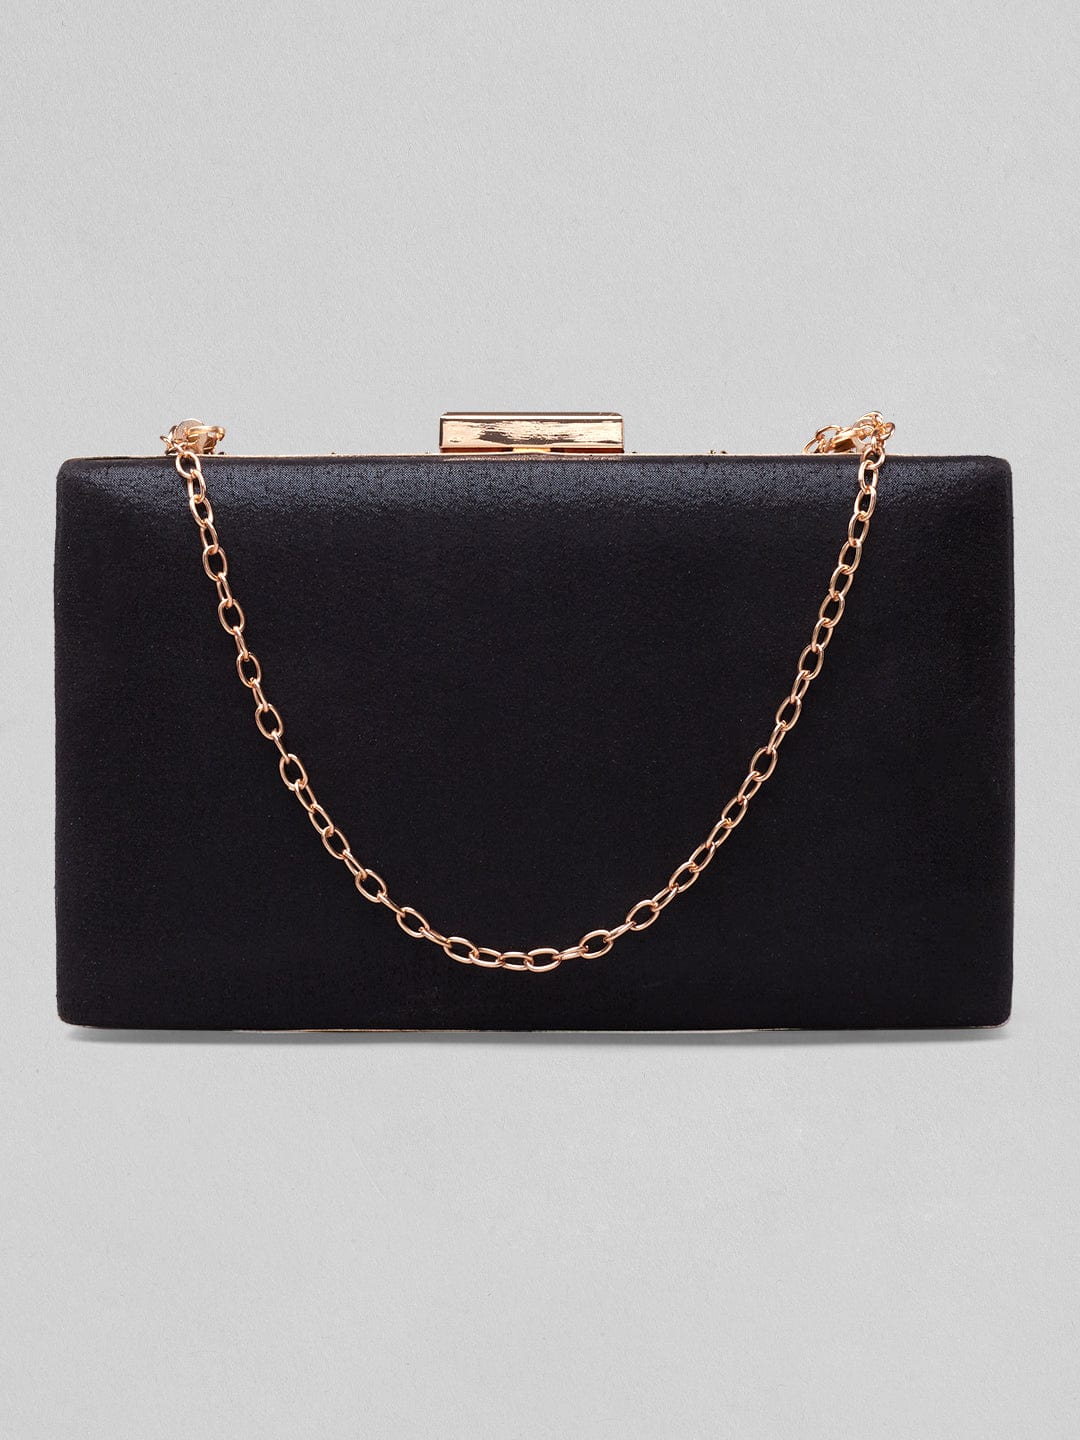 Rubans Navy Blue Coloured Box Clutch With Embellished Golden Beads Handbag & Wallet Accessories